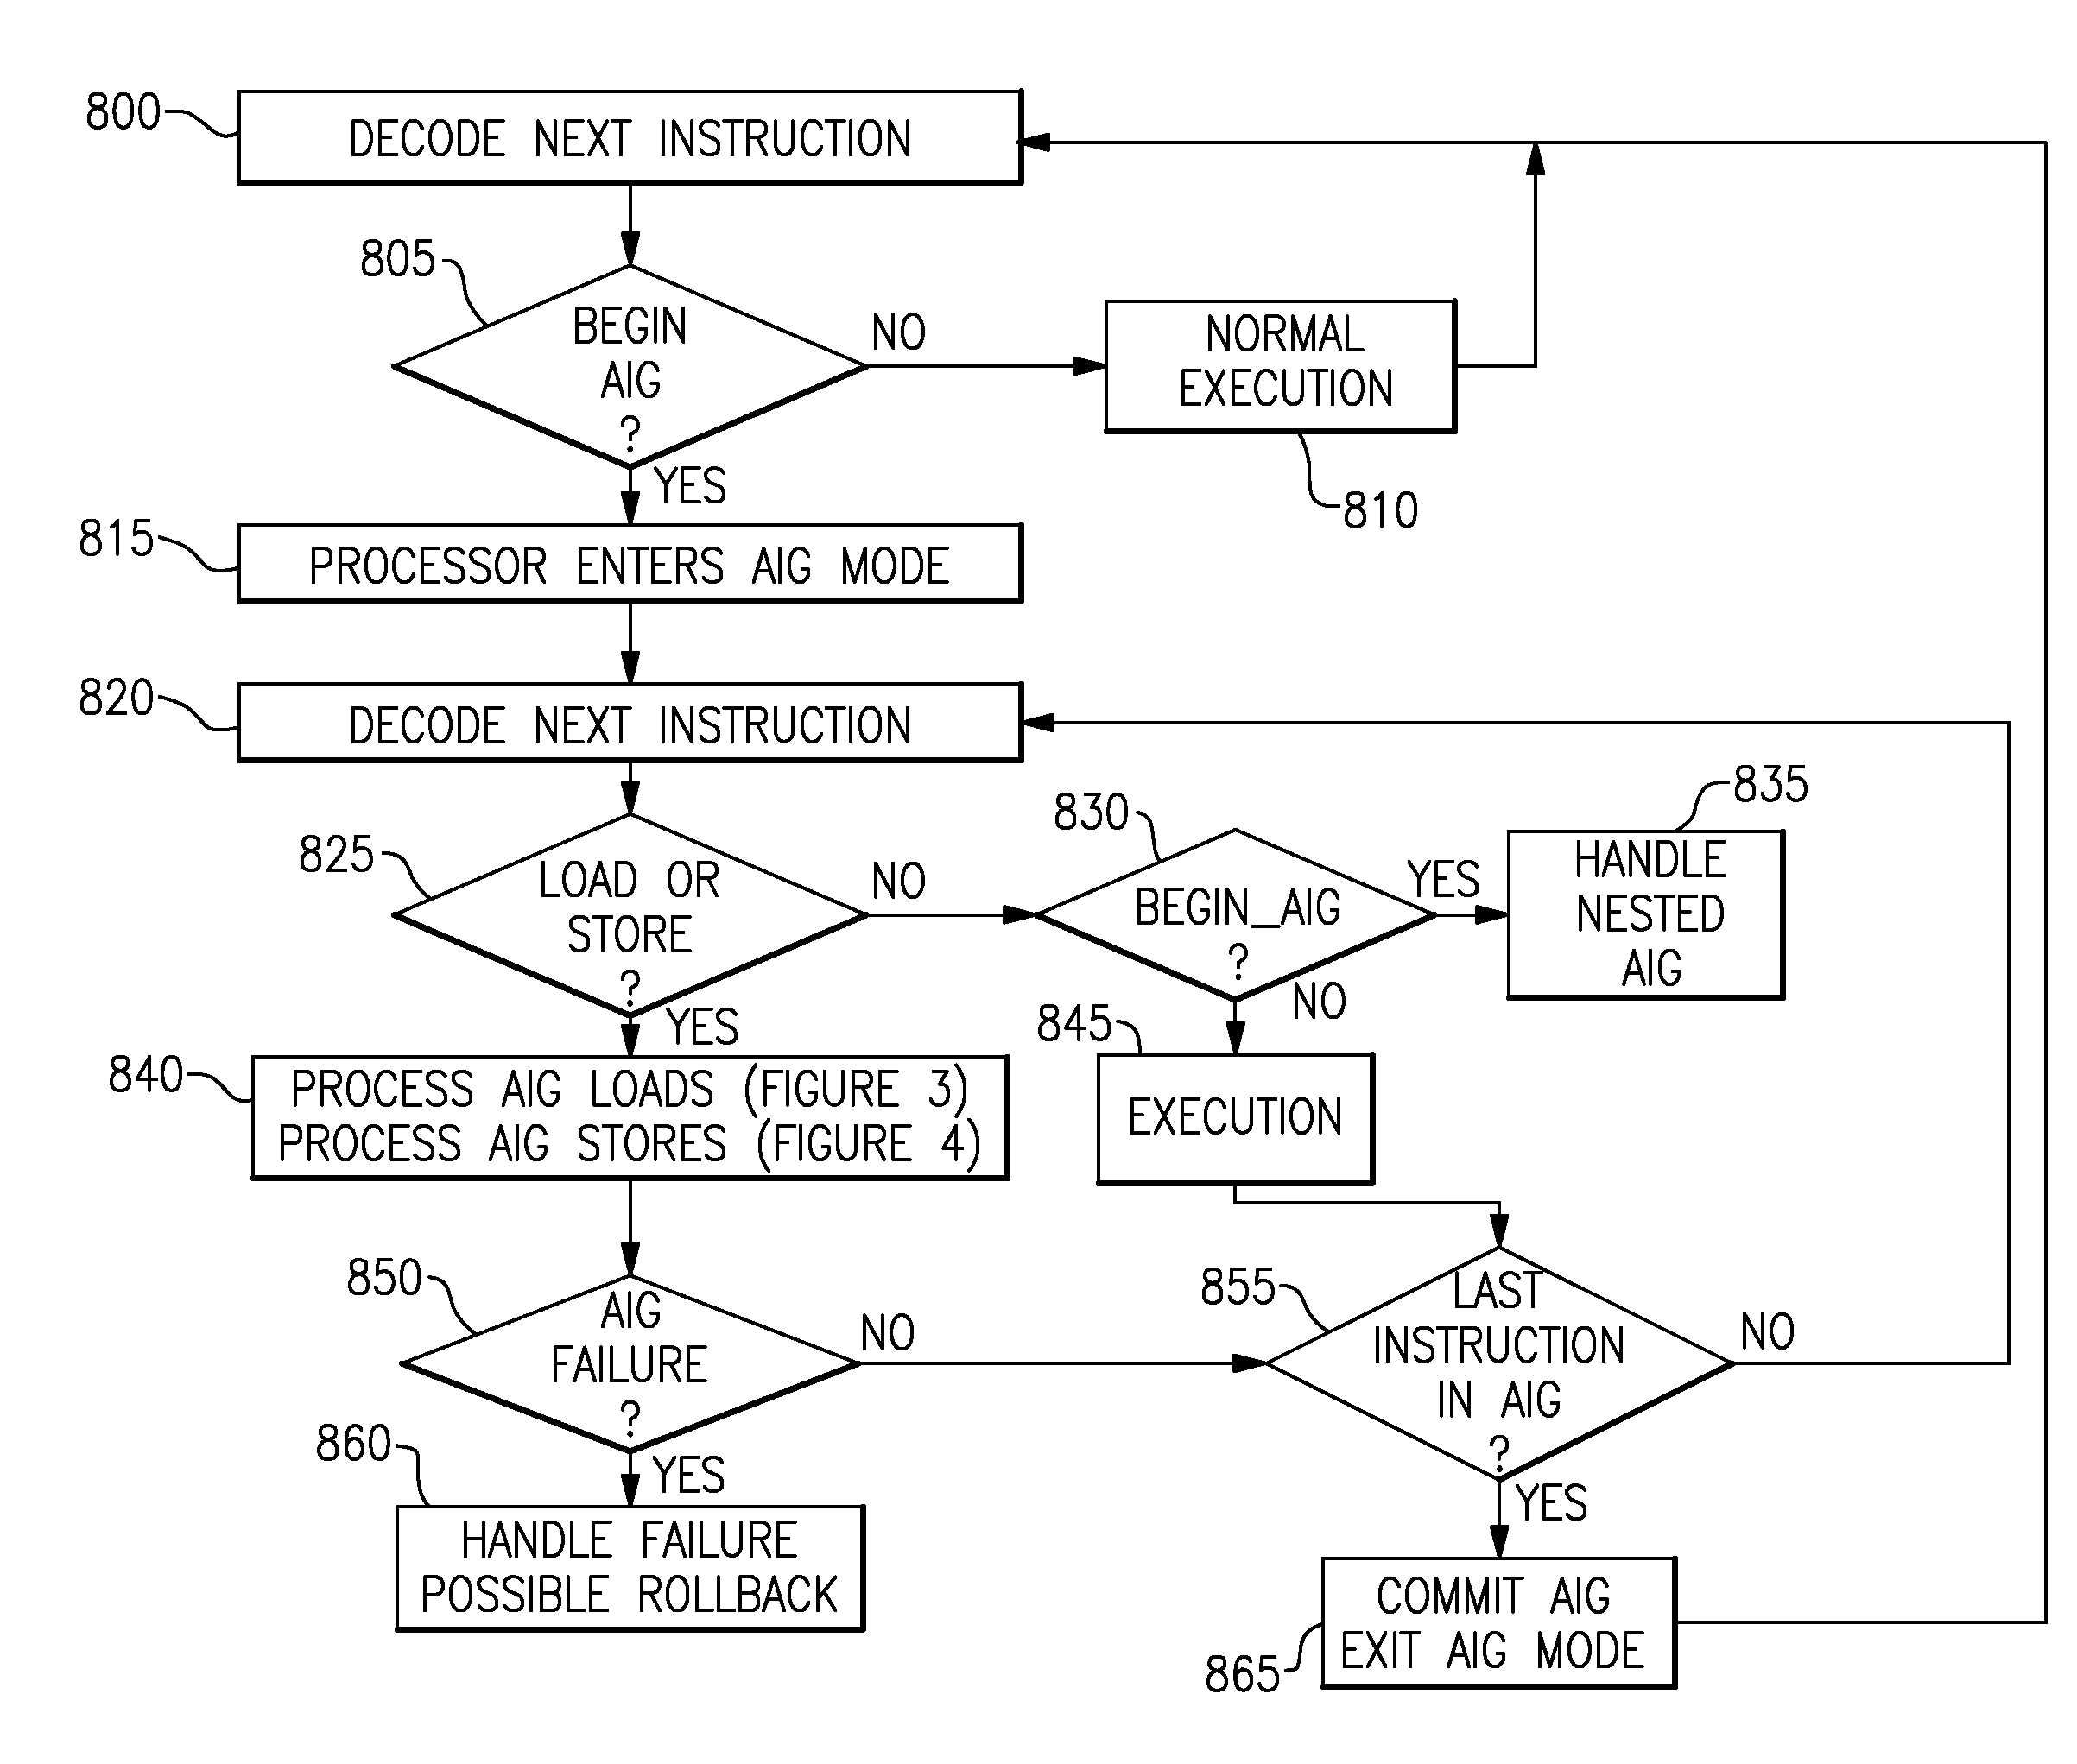 Transactional memory computing system with support for chained transactions